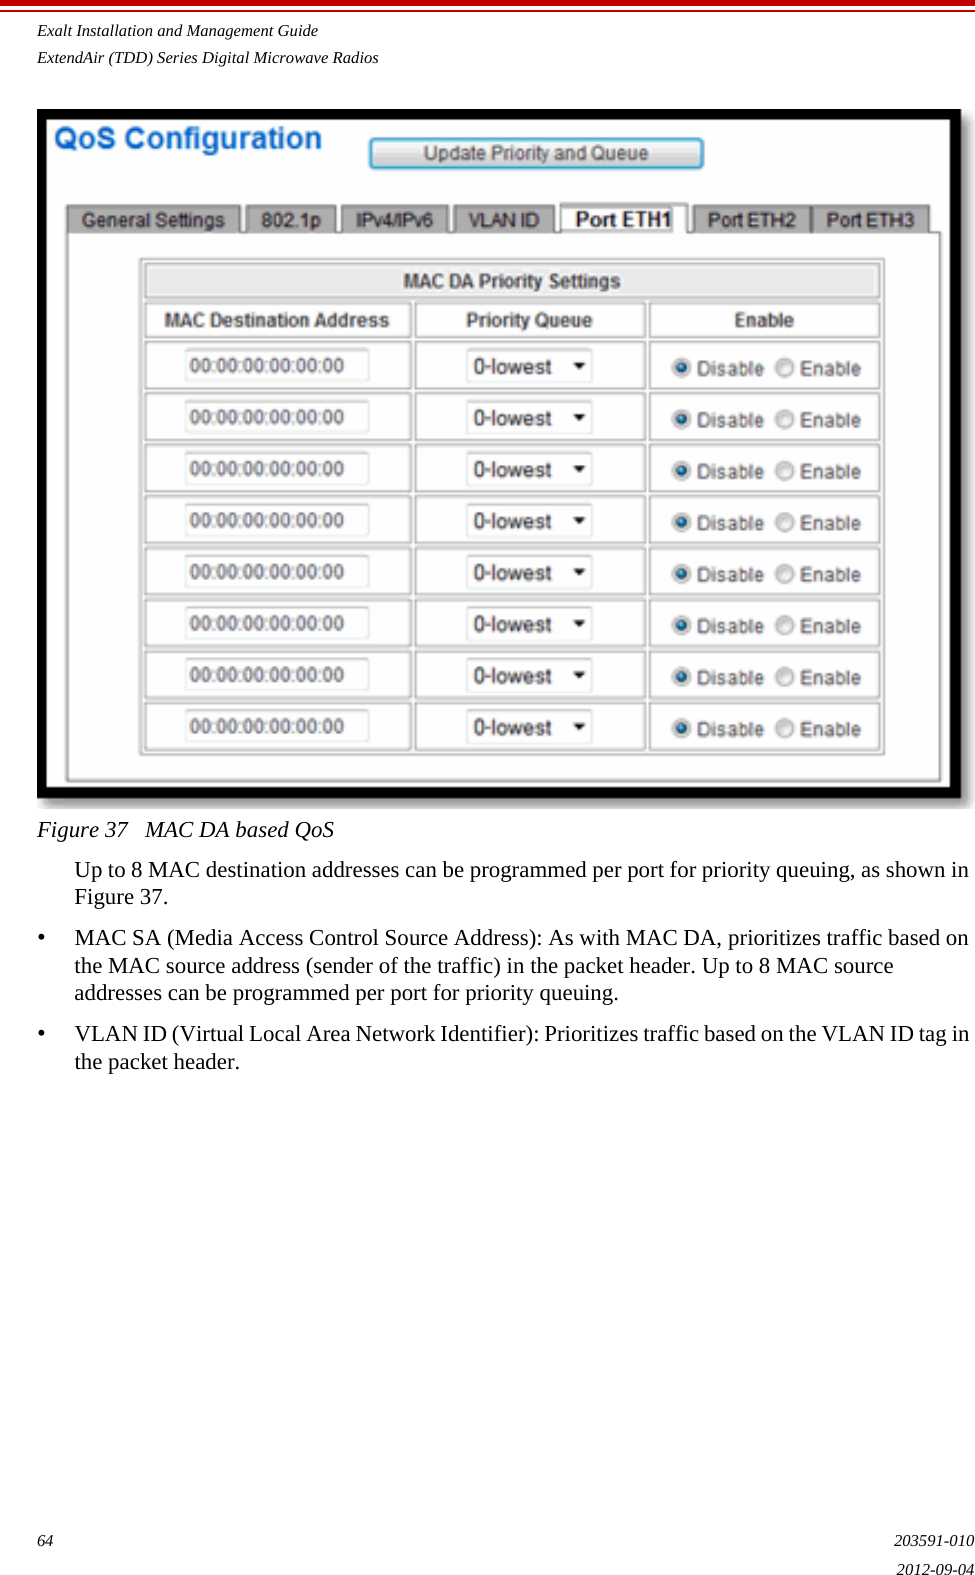 Exalt Installation and Management GuideExtendAir (TDD) Series Digital Microwave Radios64 203591-0102012-09-04Figure 37   MAC DA based QoSUp to 8 MAC destination addresses can be programmed per port for priority queuing, as shown in Figure 37.•MAC SA (Media Access Control Source Address): As with MAC DA, prioritizes traffic based on the MAC source address (sender of the traffic) in the packet header. Up to 8 MAC source addresses can be programmed per port for priority queuing.•VLAN ID (Virtual Local Area Network Identifier): Prioritizes traffic based on the VLAN ID tag in the packet header. 